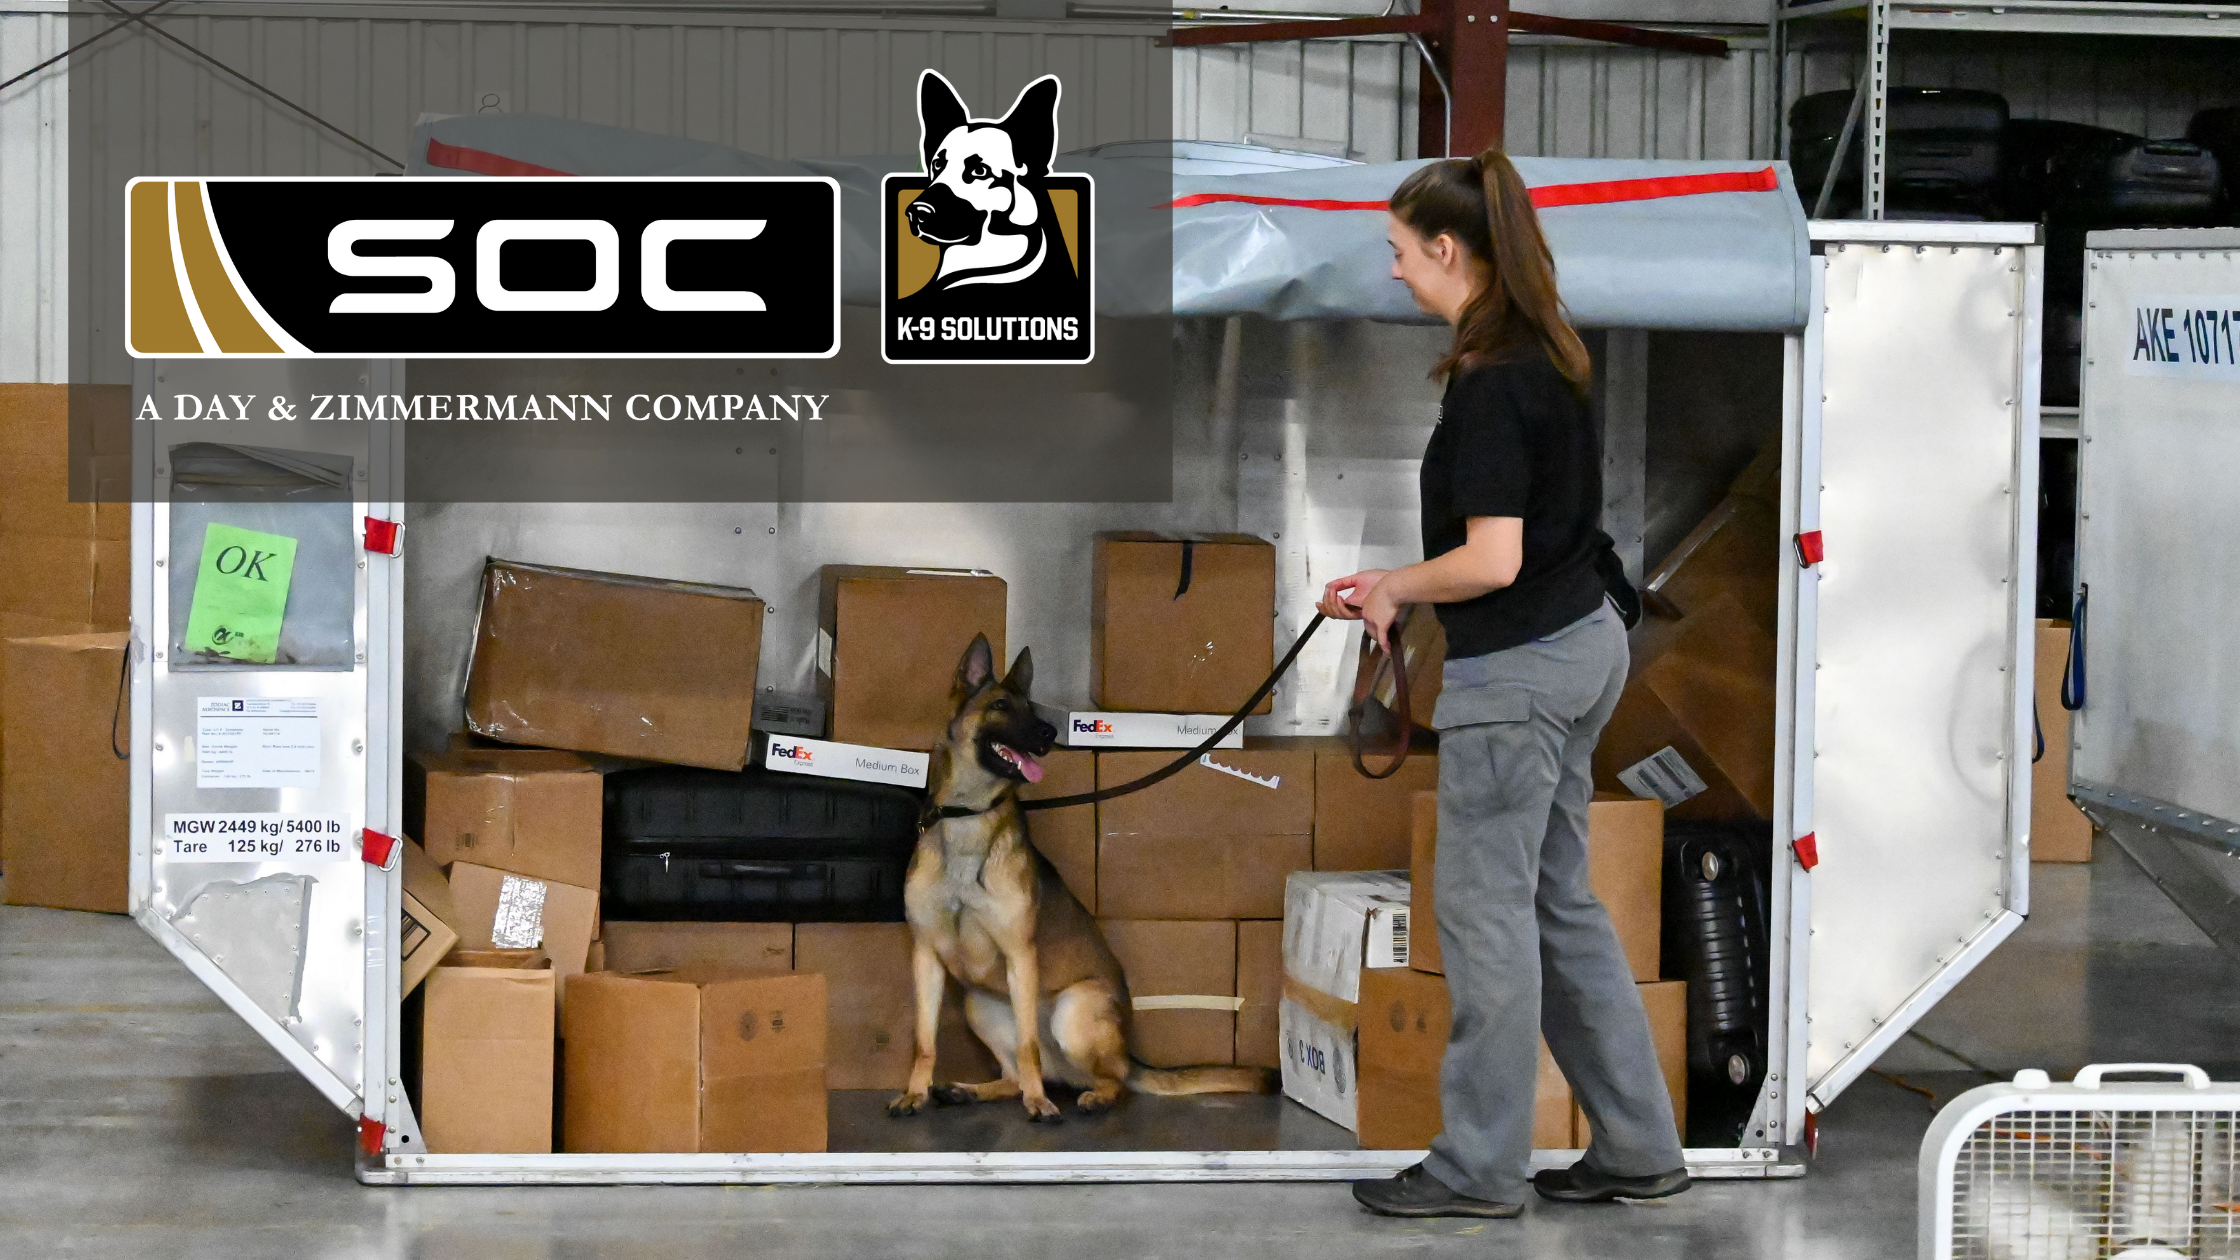 Four Reasons Why Canines Remain the Chosen Partner in Explosive Detection